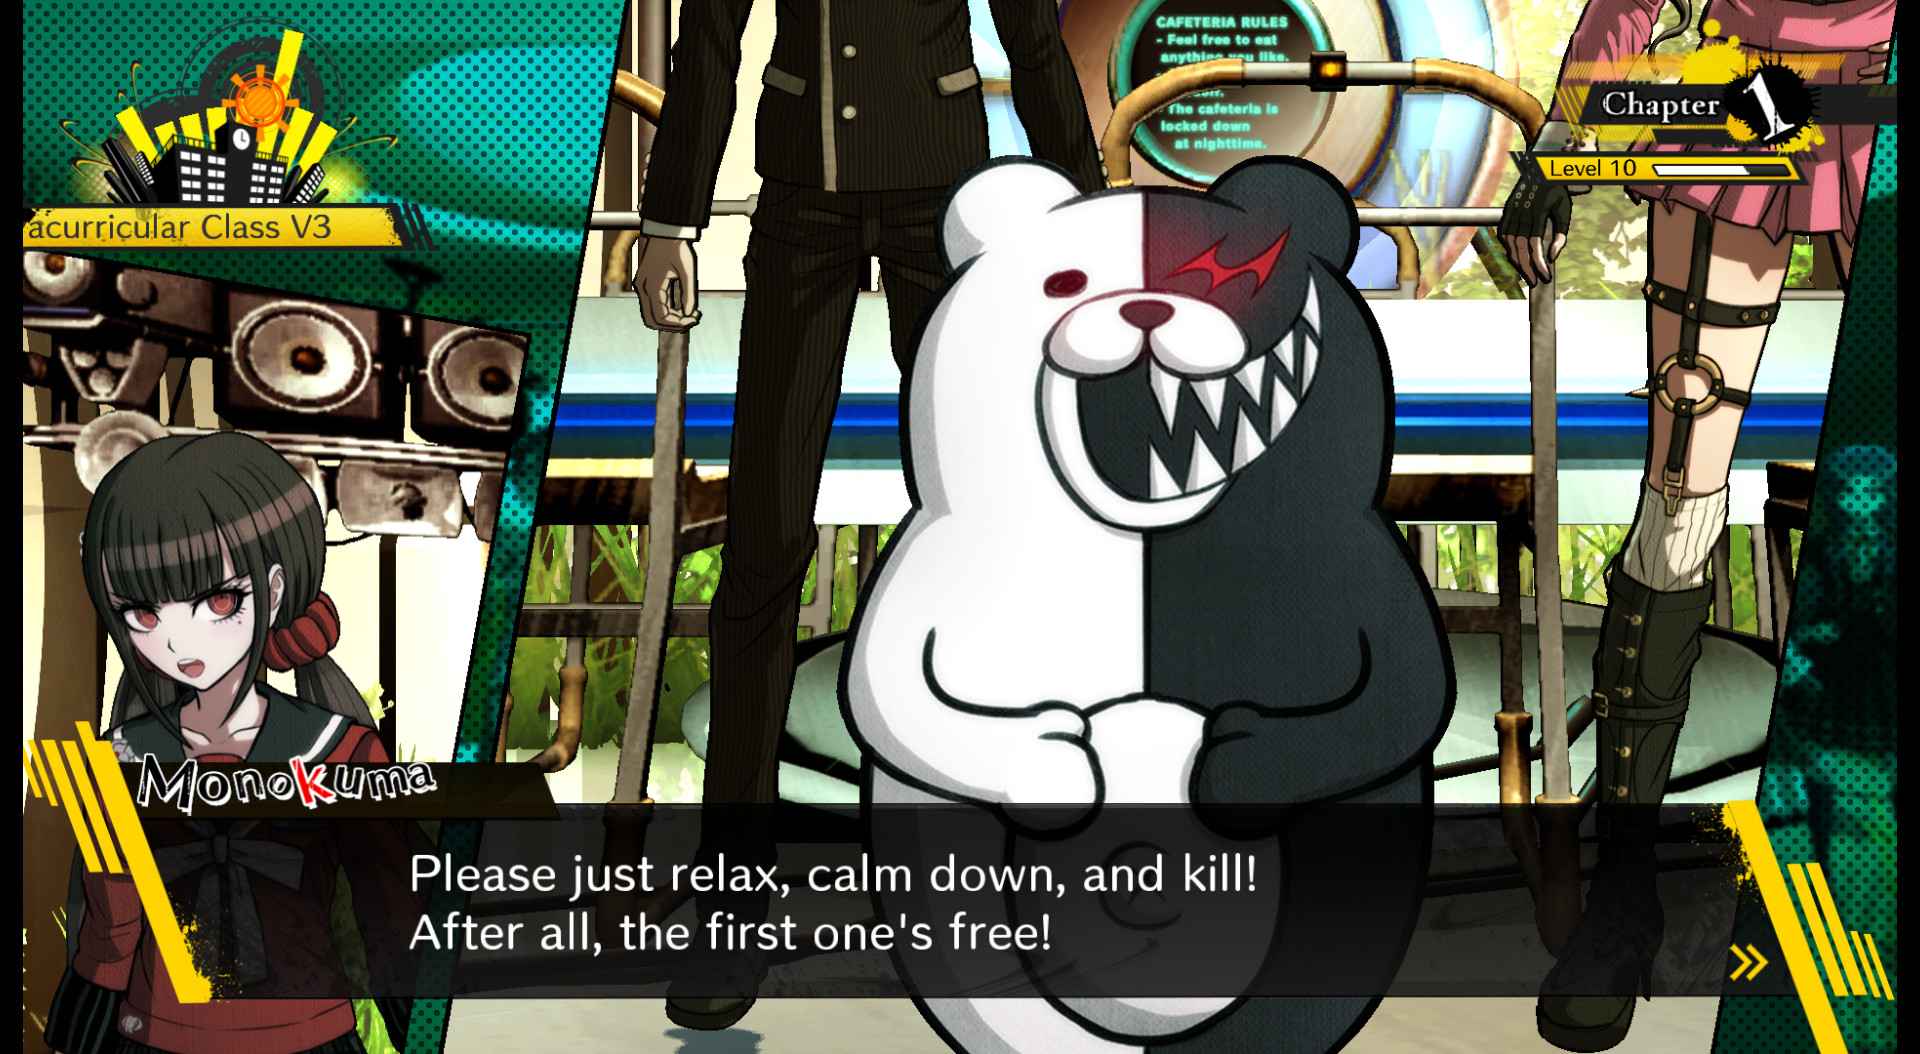 Danganronpa Trilogy coming to PlayStation 4 in 2019